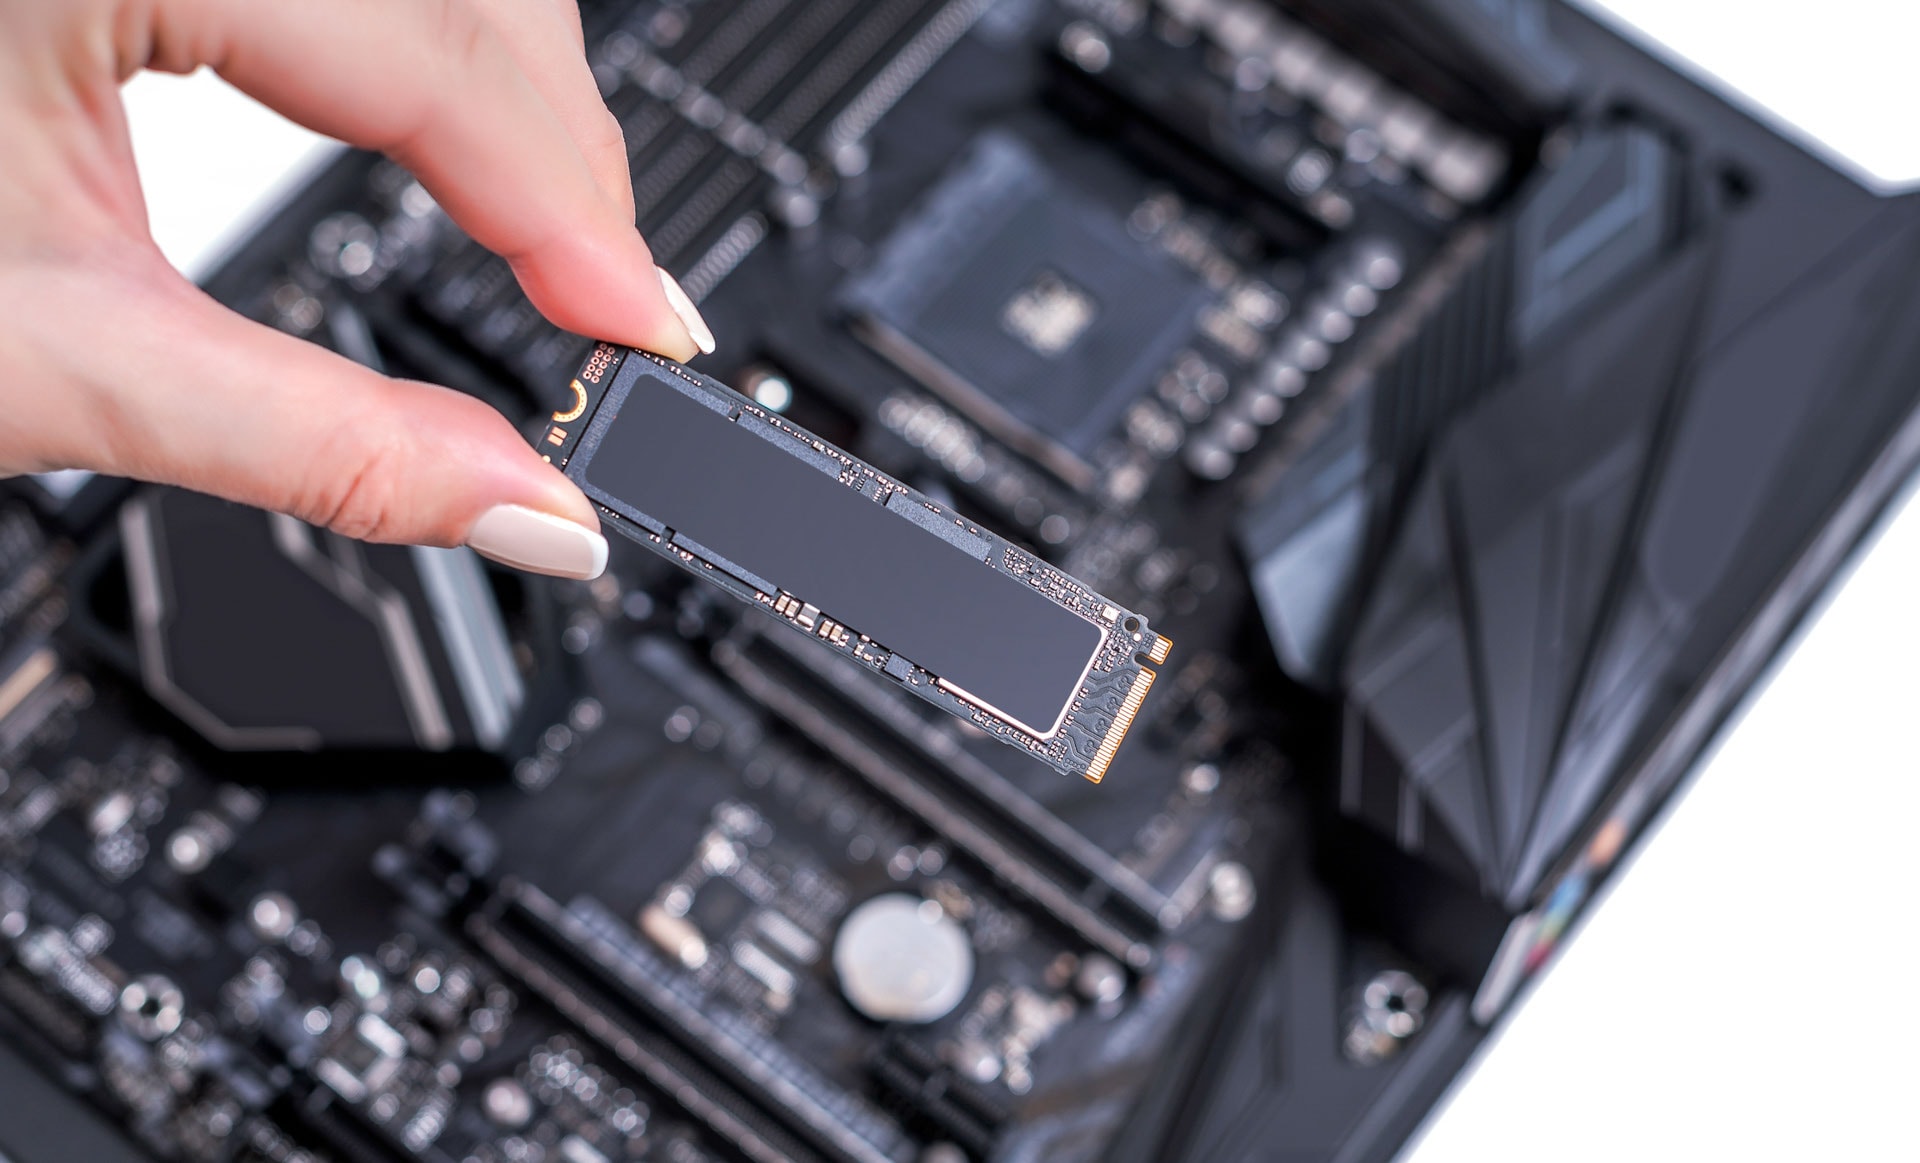 Are Solid State Drives / SSDs More Reliable Than HDDs?